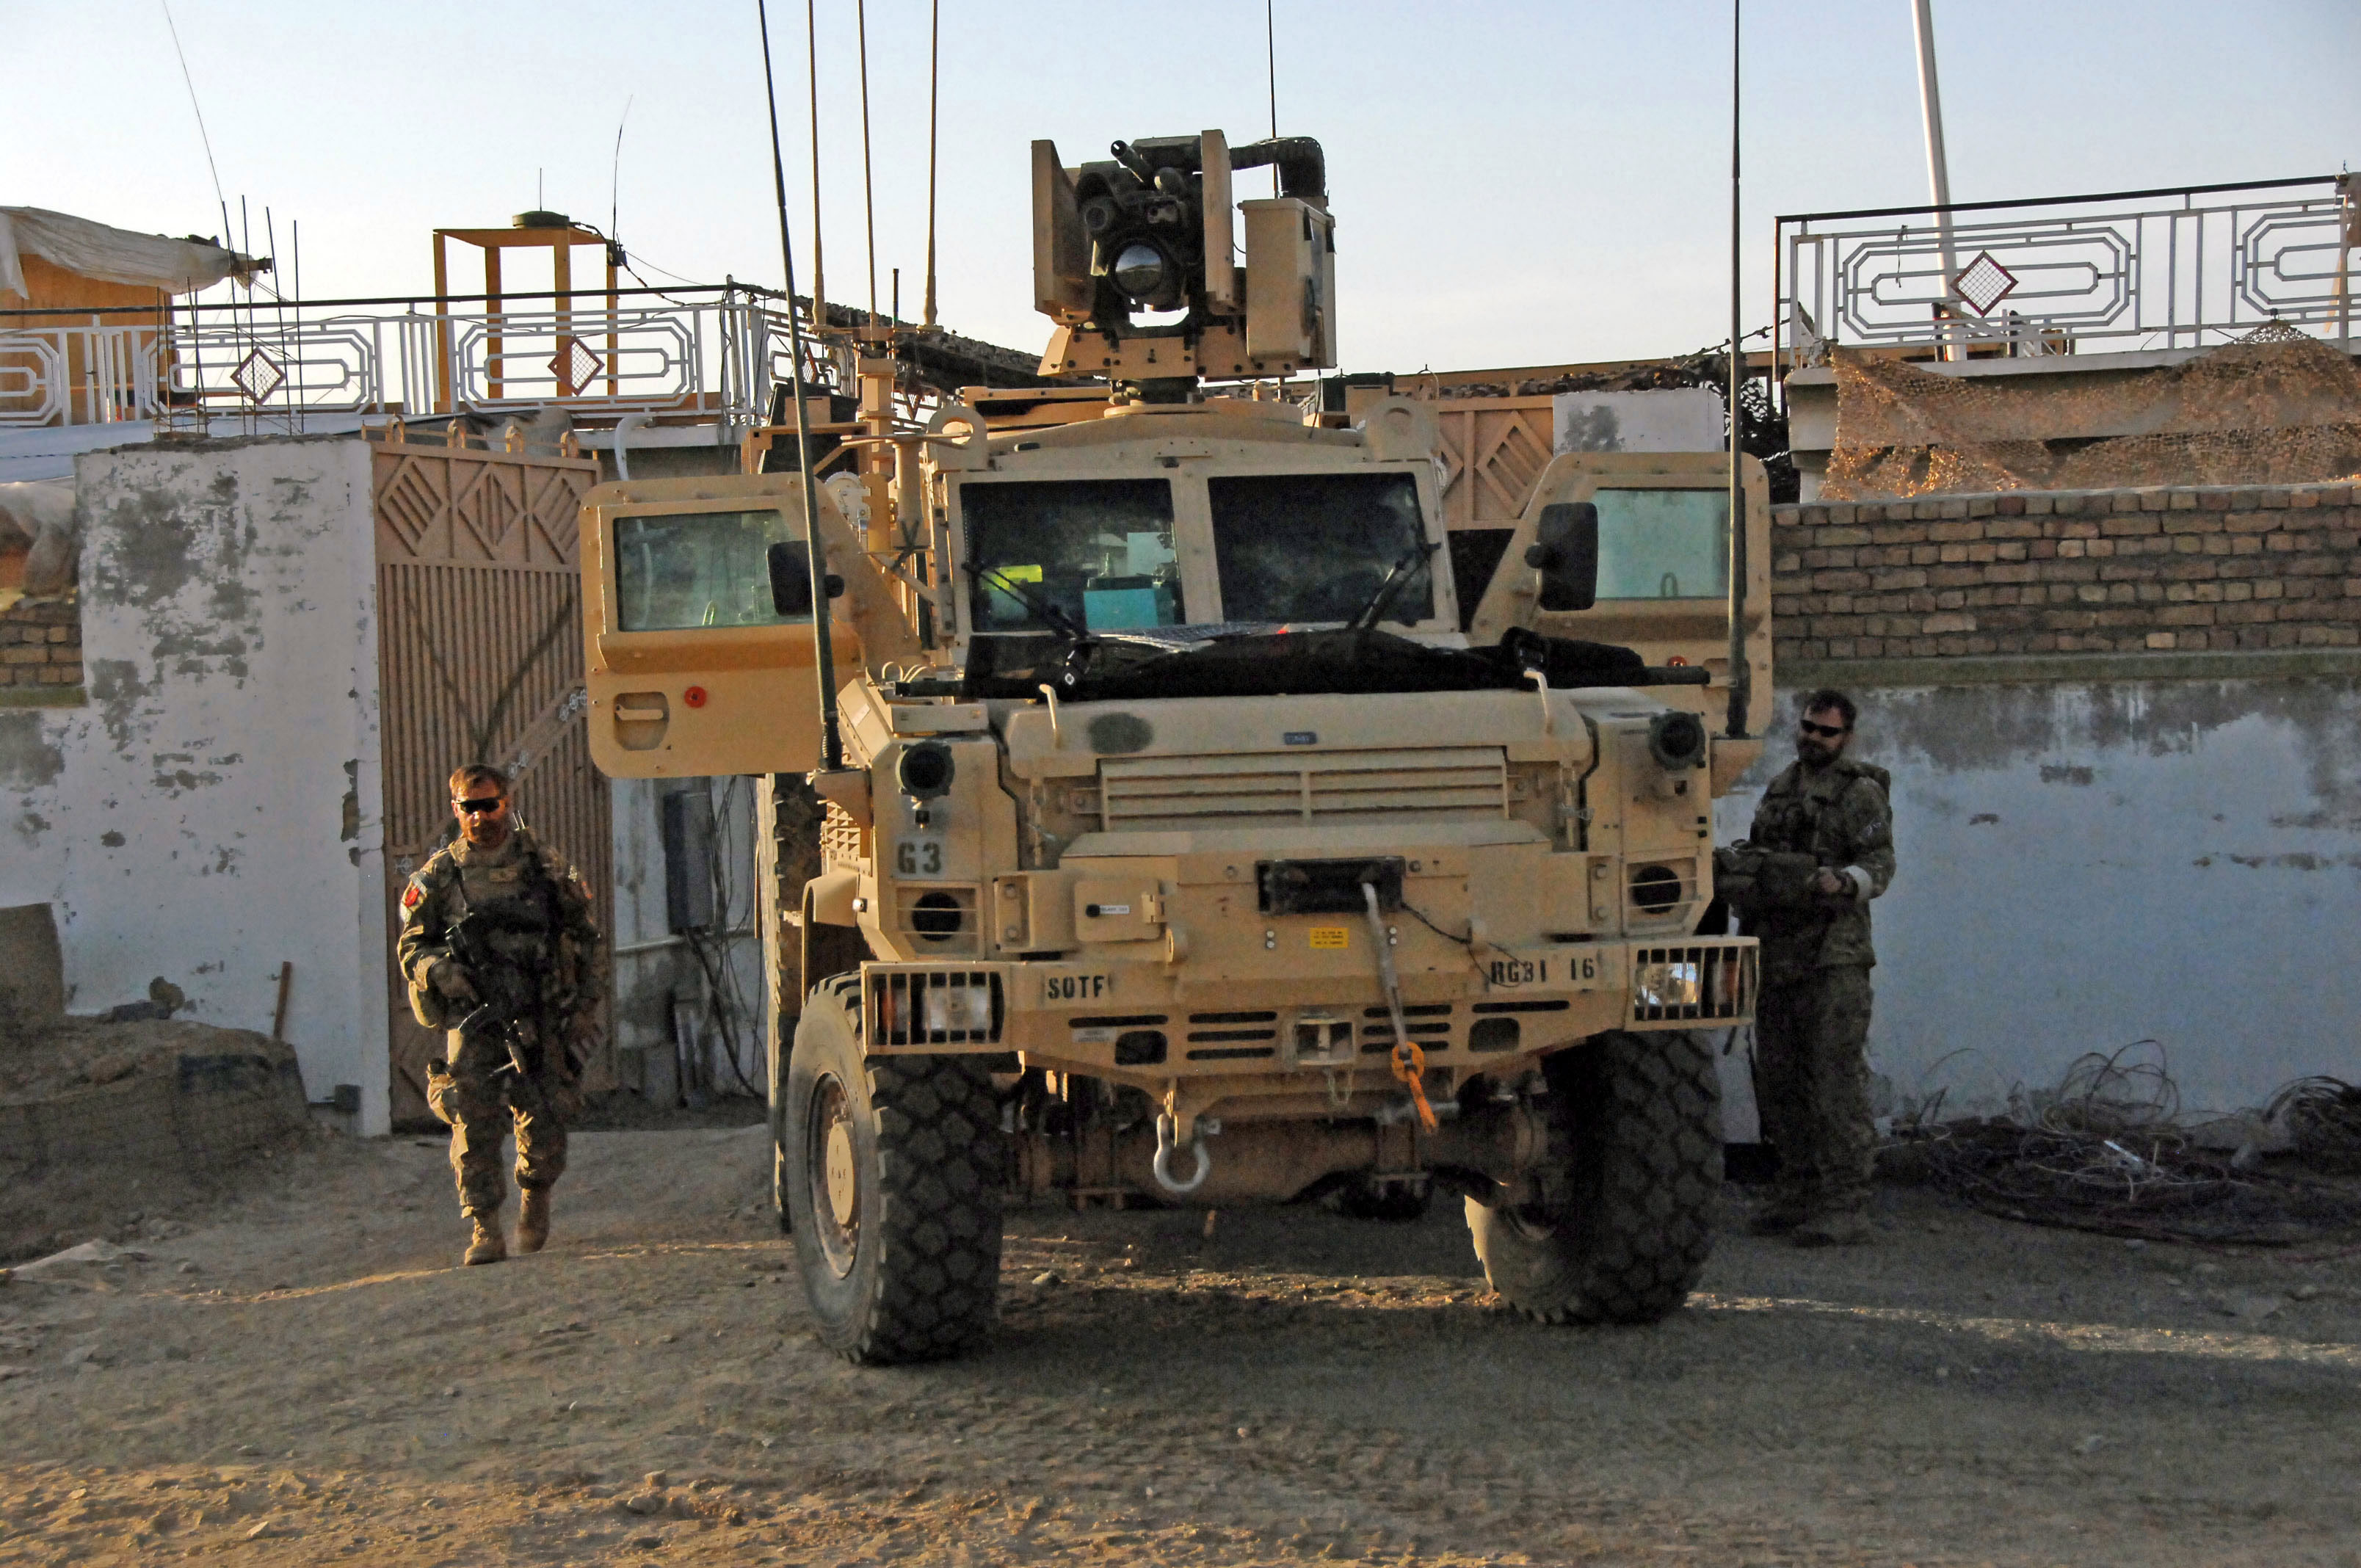 RG-31 MRAP - Special Ops Vehicles Photos